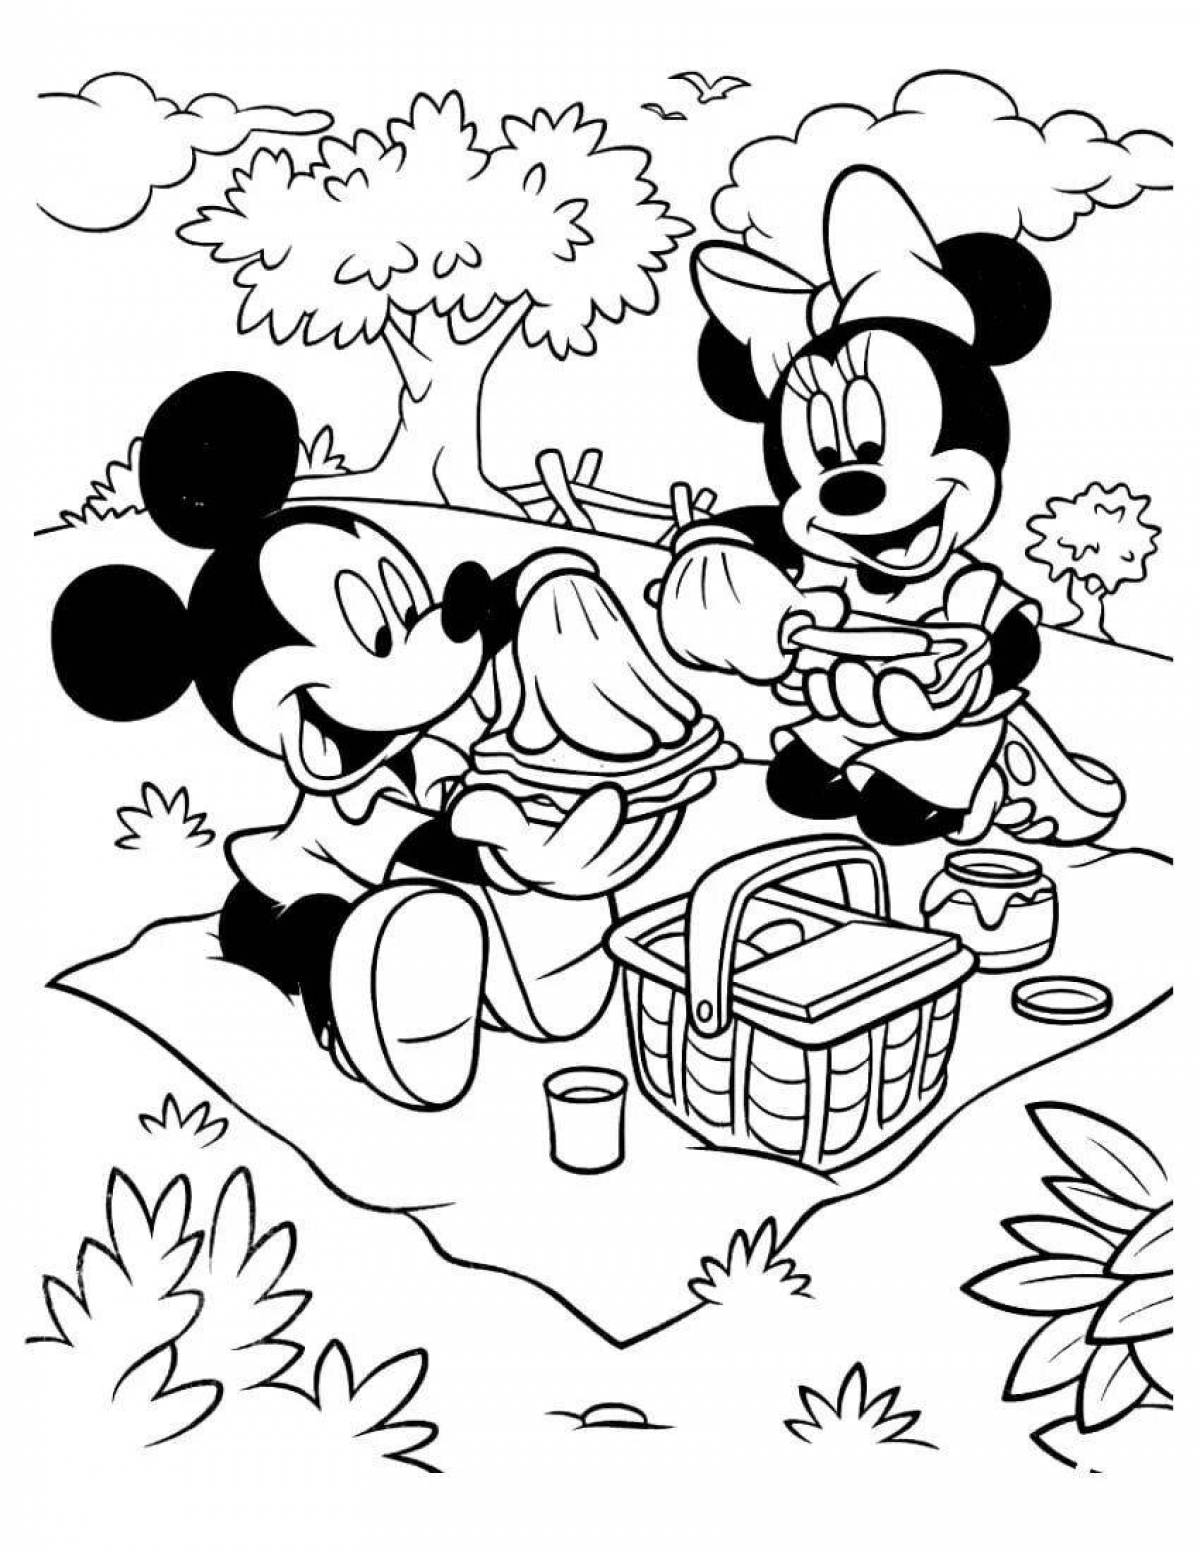 Colorful minnie mouse coloring book for kids